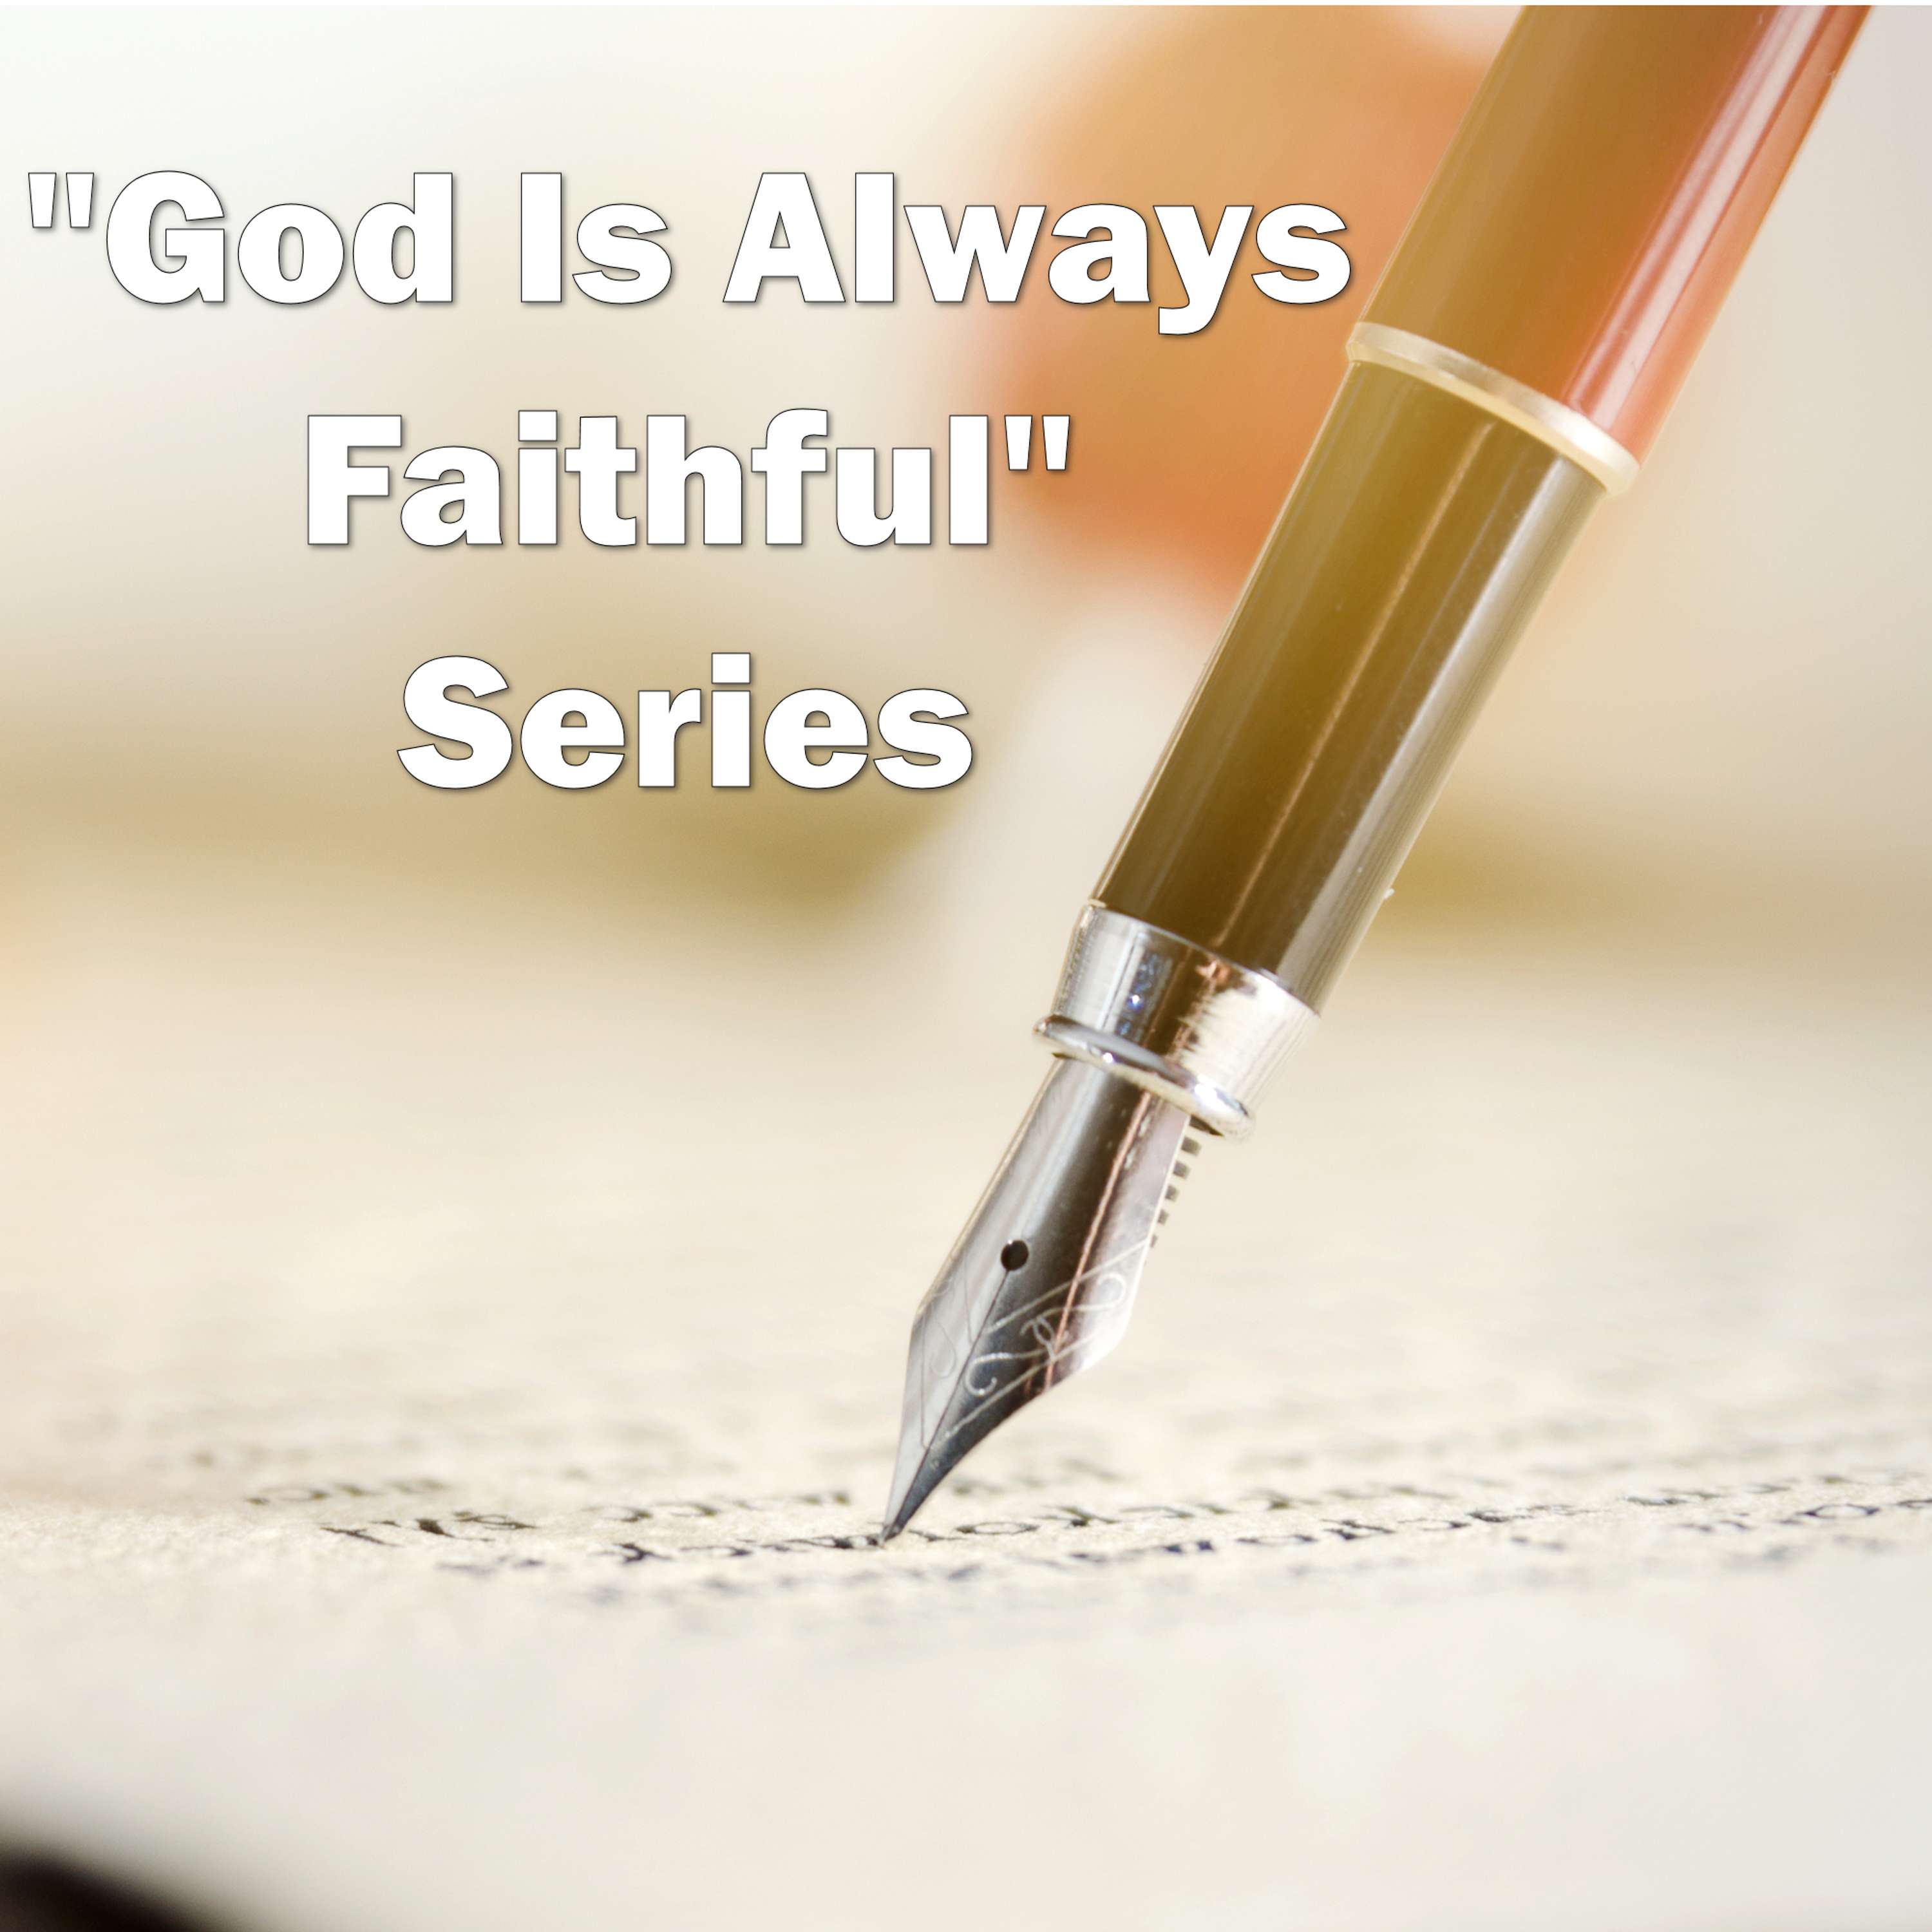 Session 2 - The Oldest Tricks of the Devil (God Is Always Faithful Series)